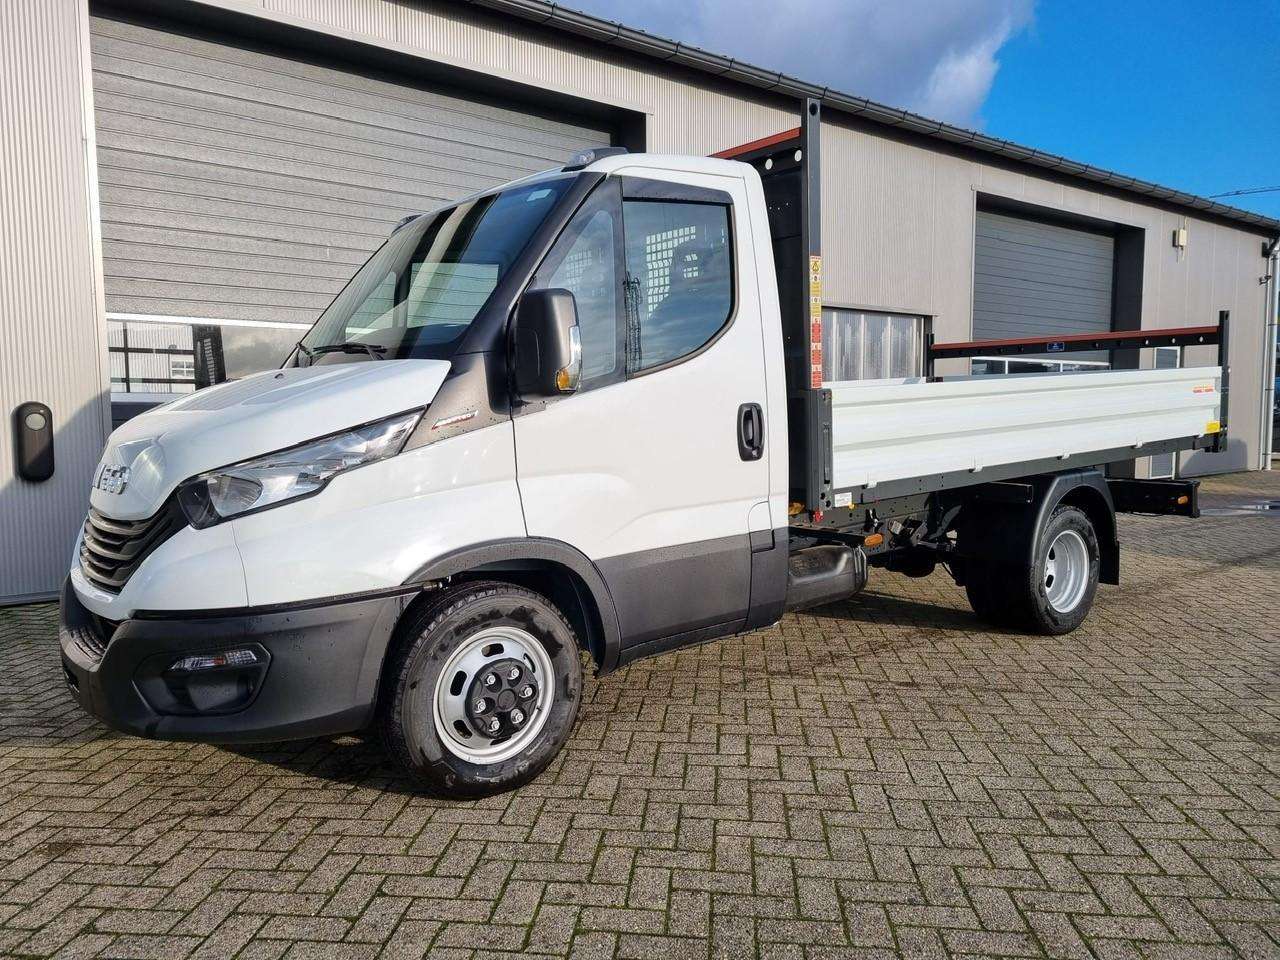 Iveco Daily Transporter in White used in Sankt Georgen an der Gusen for € 56,588.-